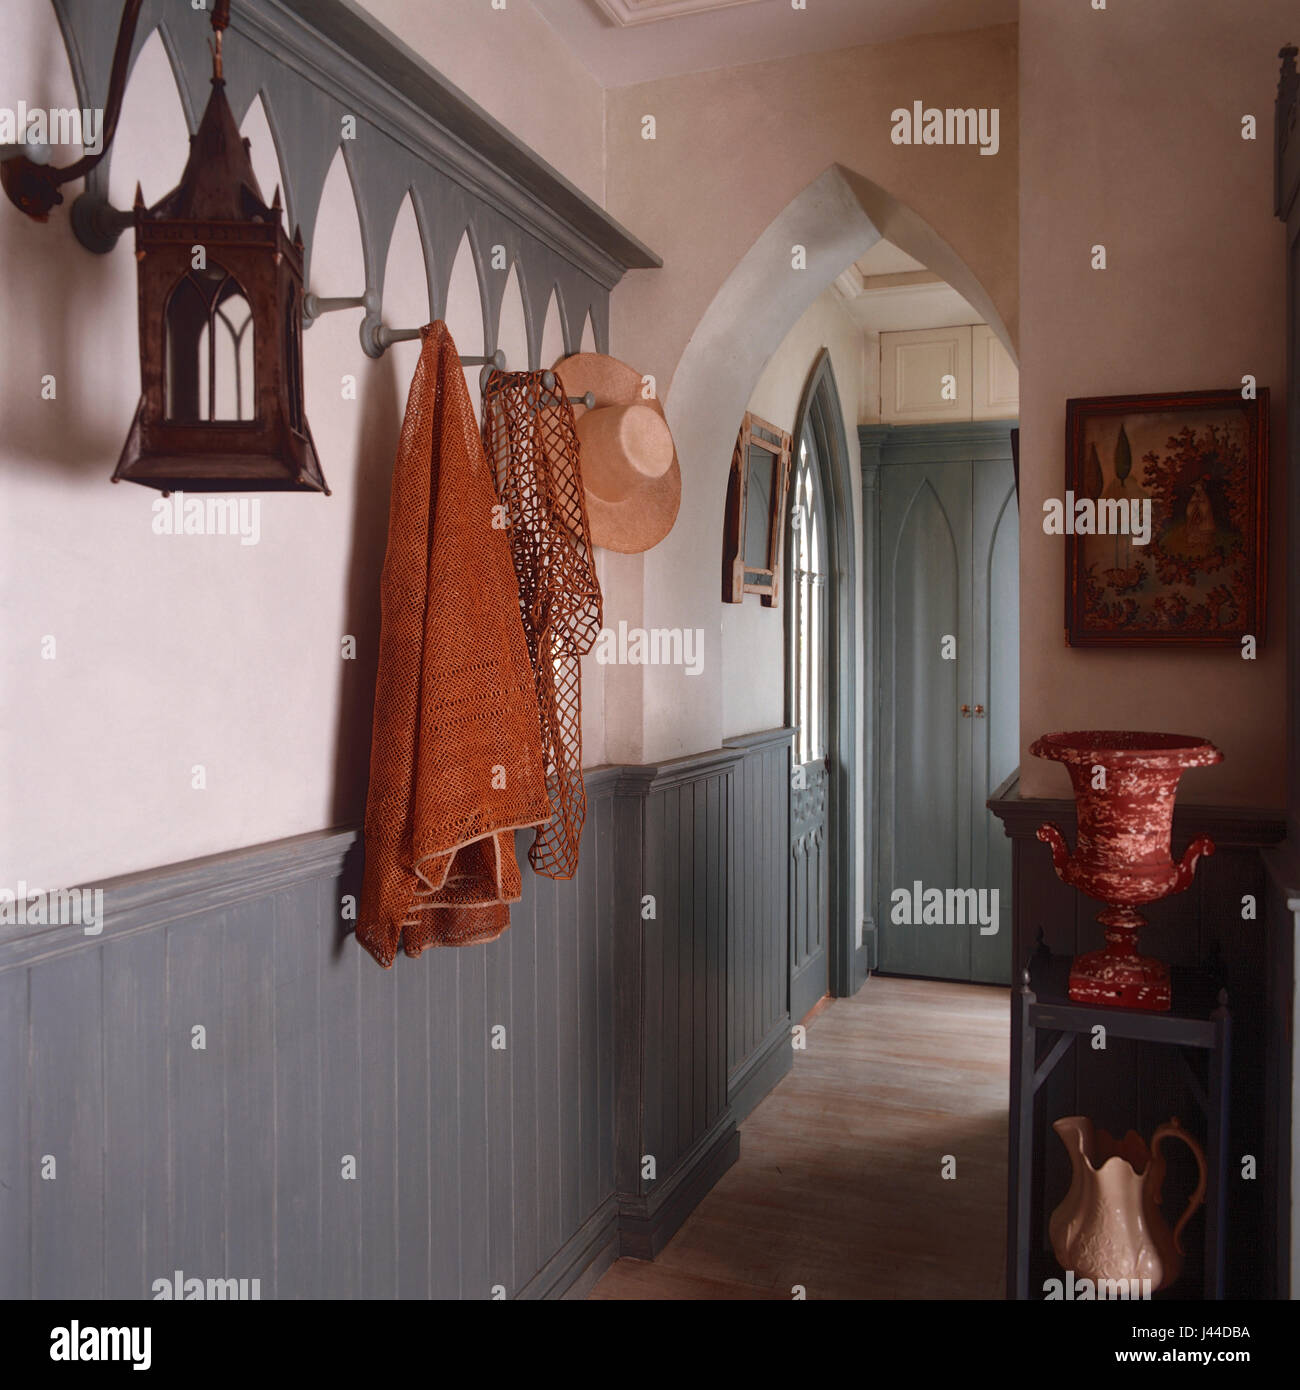 Gothic doors and archways with tongue and groove panelling in narrow hallway Stock Photo